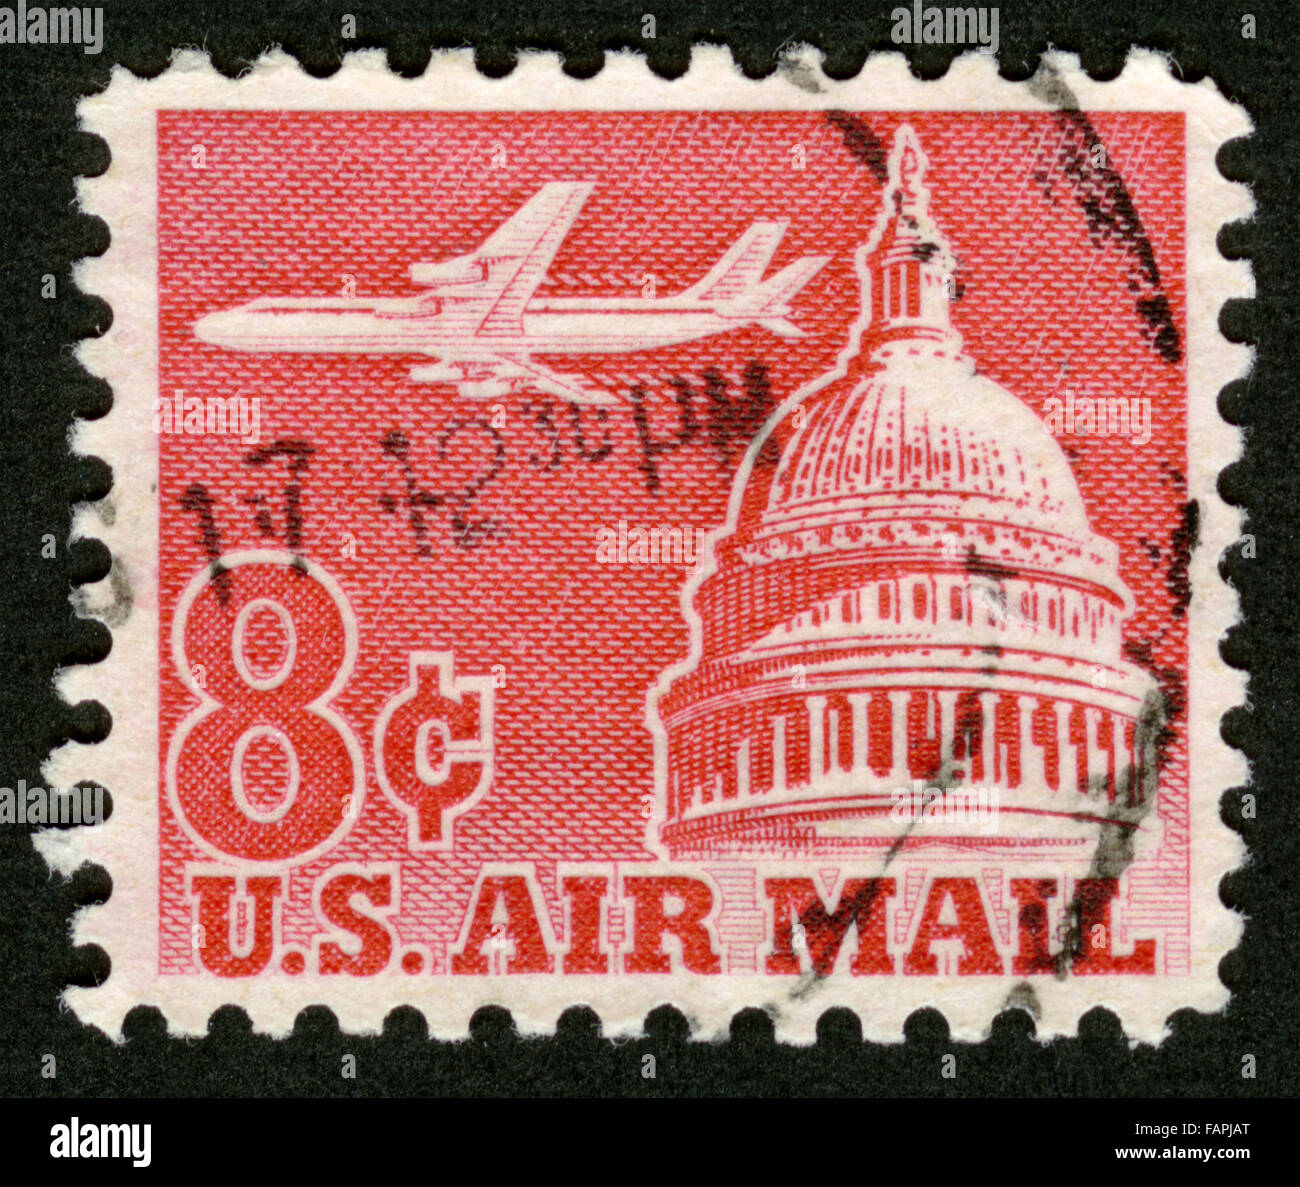 USPS Air Mail Red Forever First Class Postage Stamps Airmail Colors of the  Flag (20 stamps)